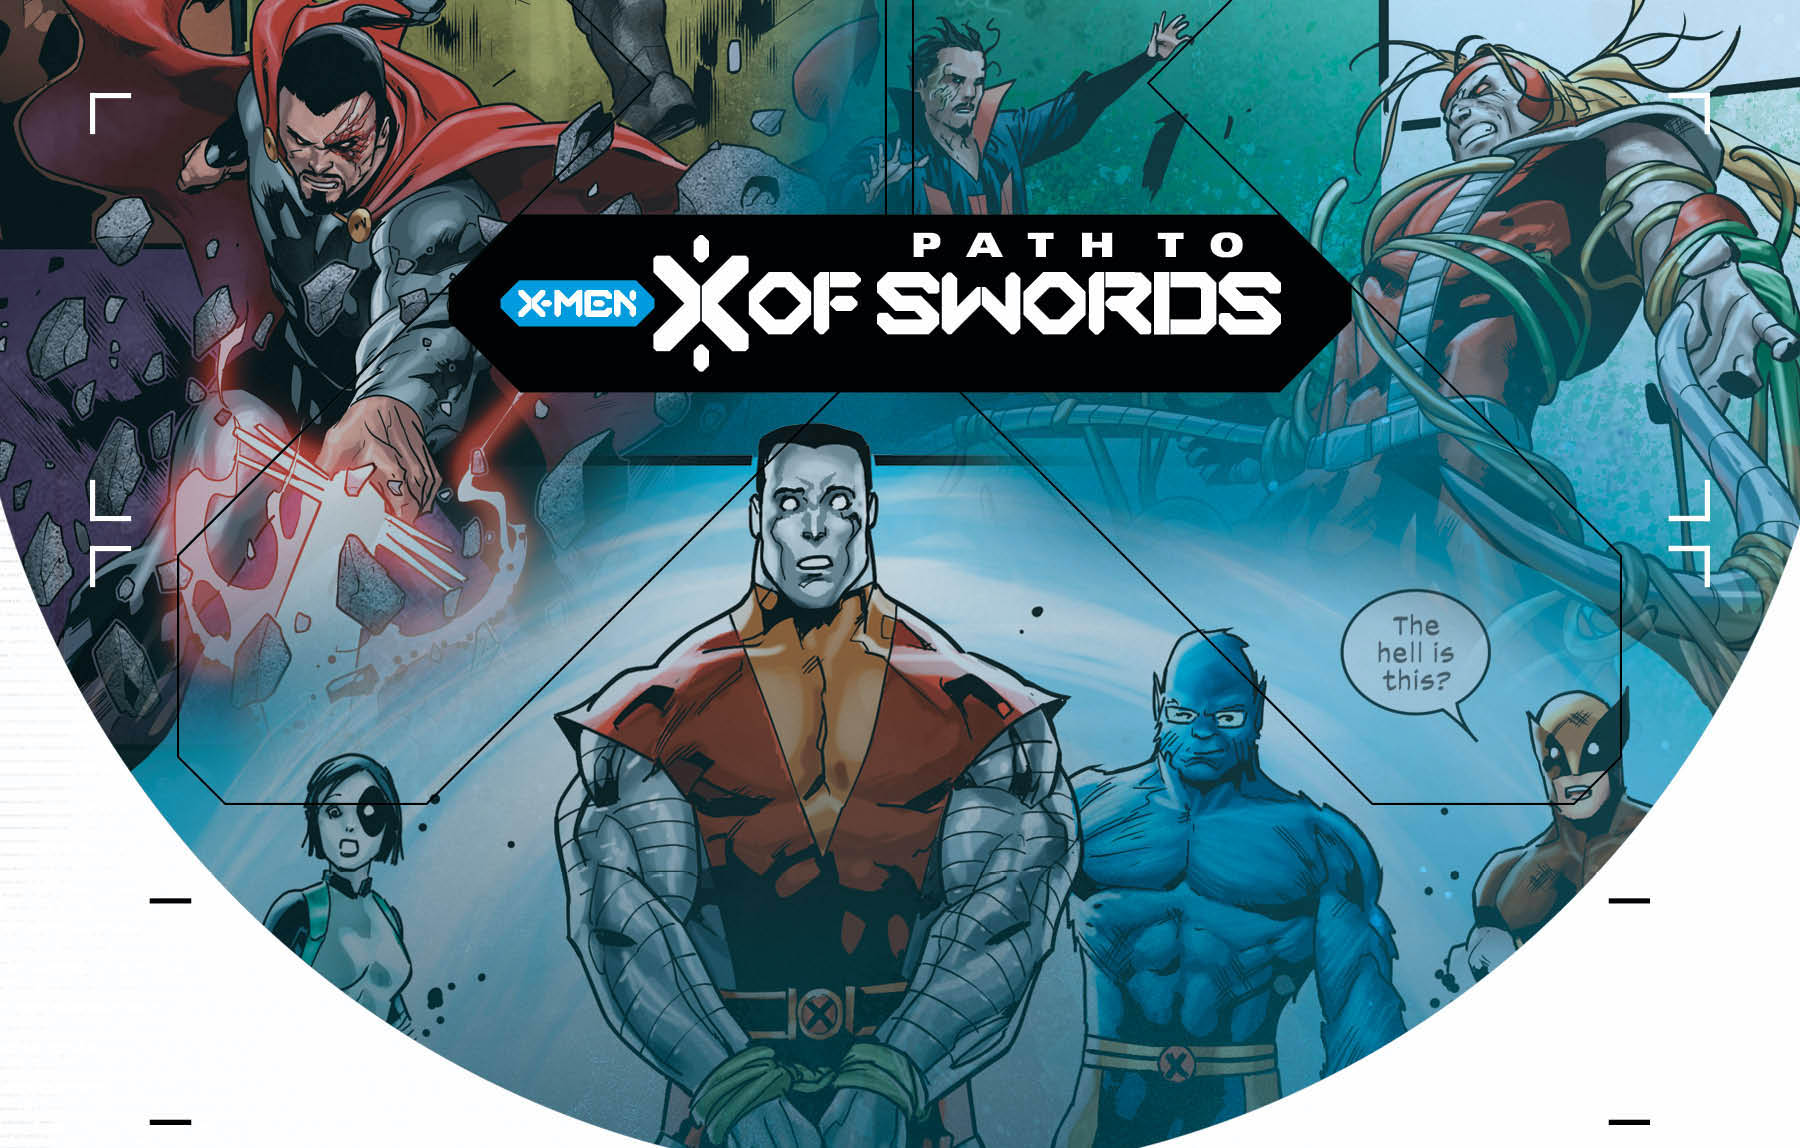 The Path to 'X of Swords' goes through X-Force #12